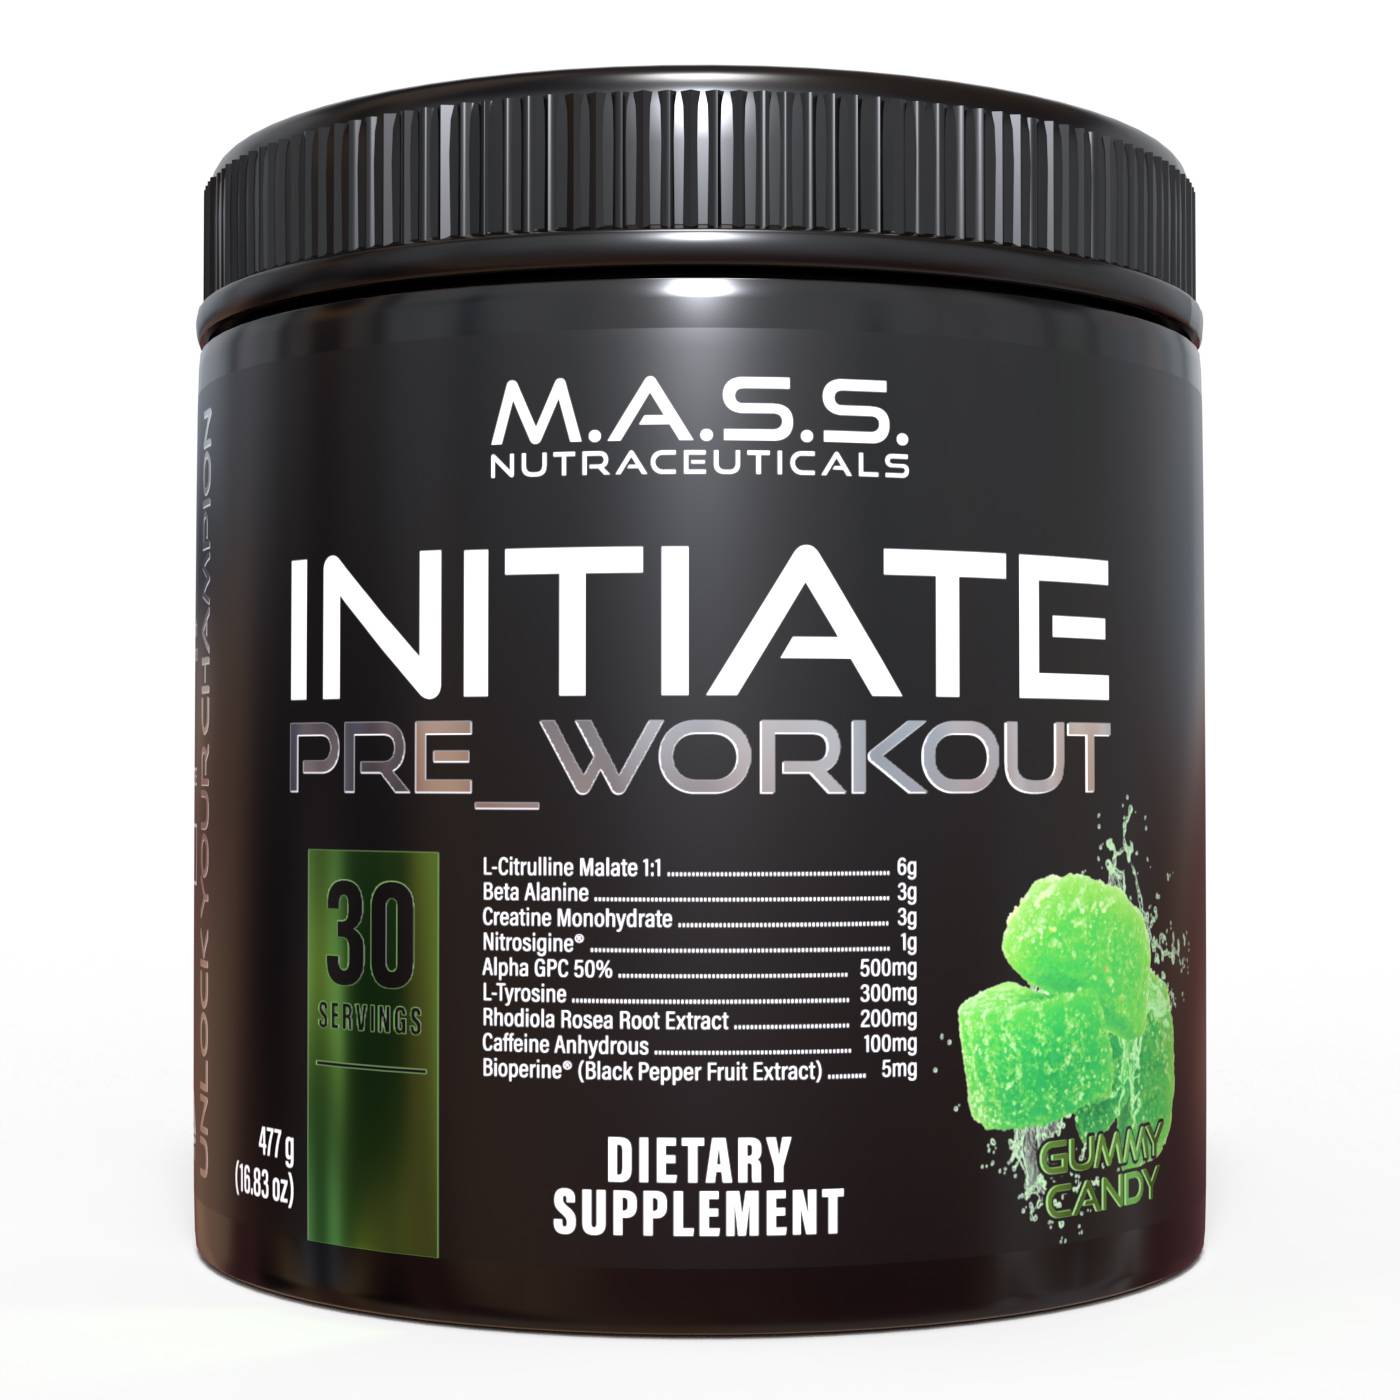 M.A.S.S. Nutraceuticals | 4740 N Cumberland Ave #137, Chicago, IL 60656, United States | Phone: (224) 315-3917